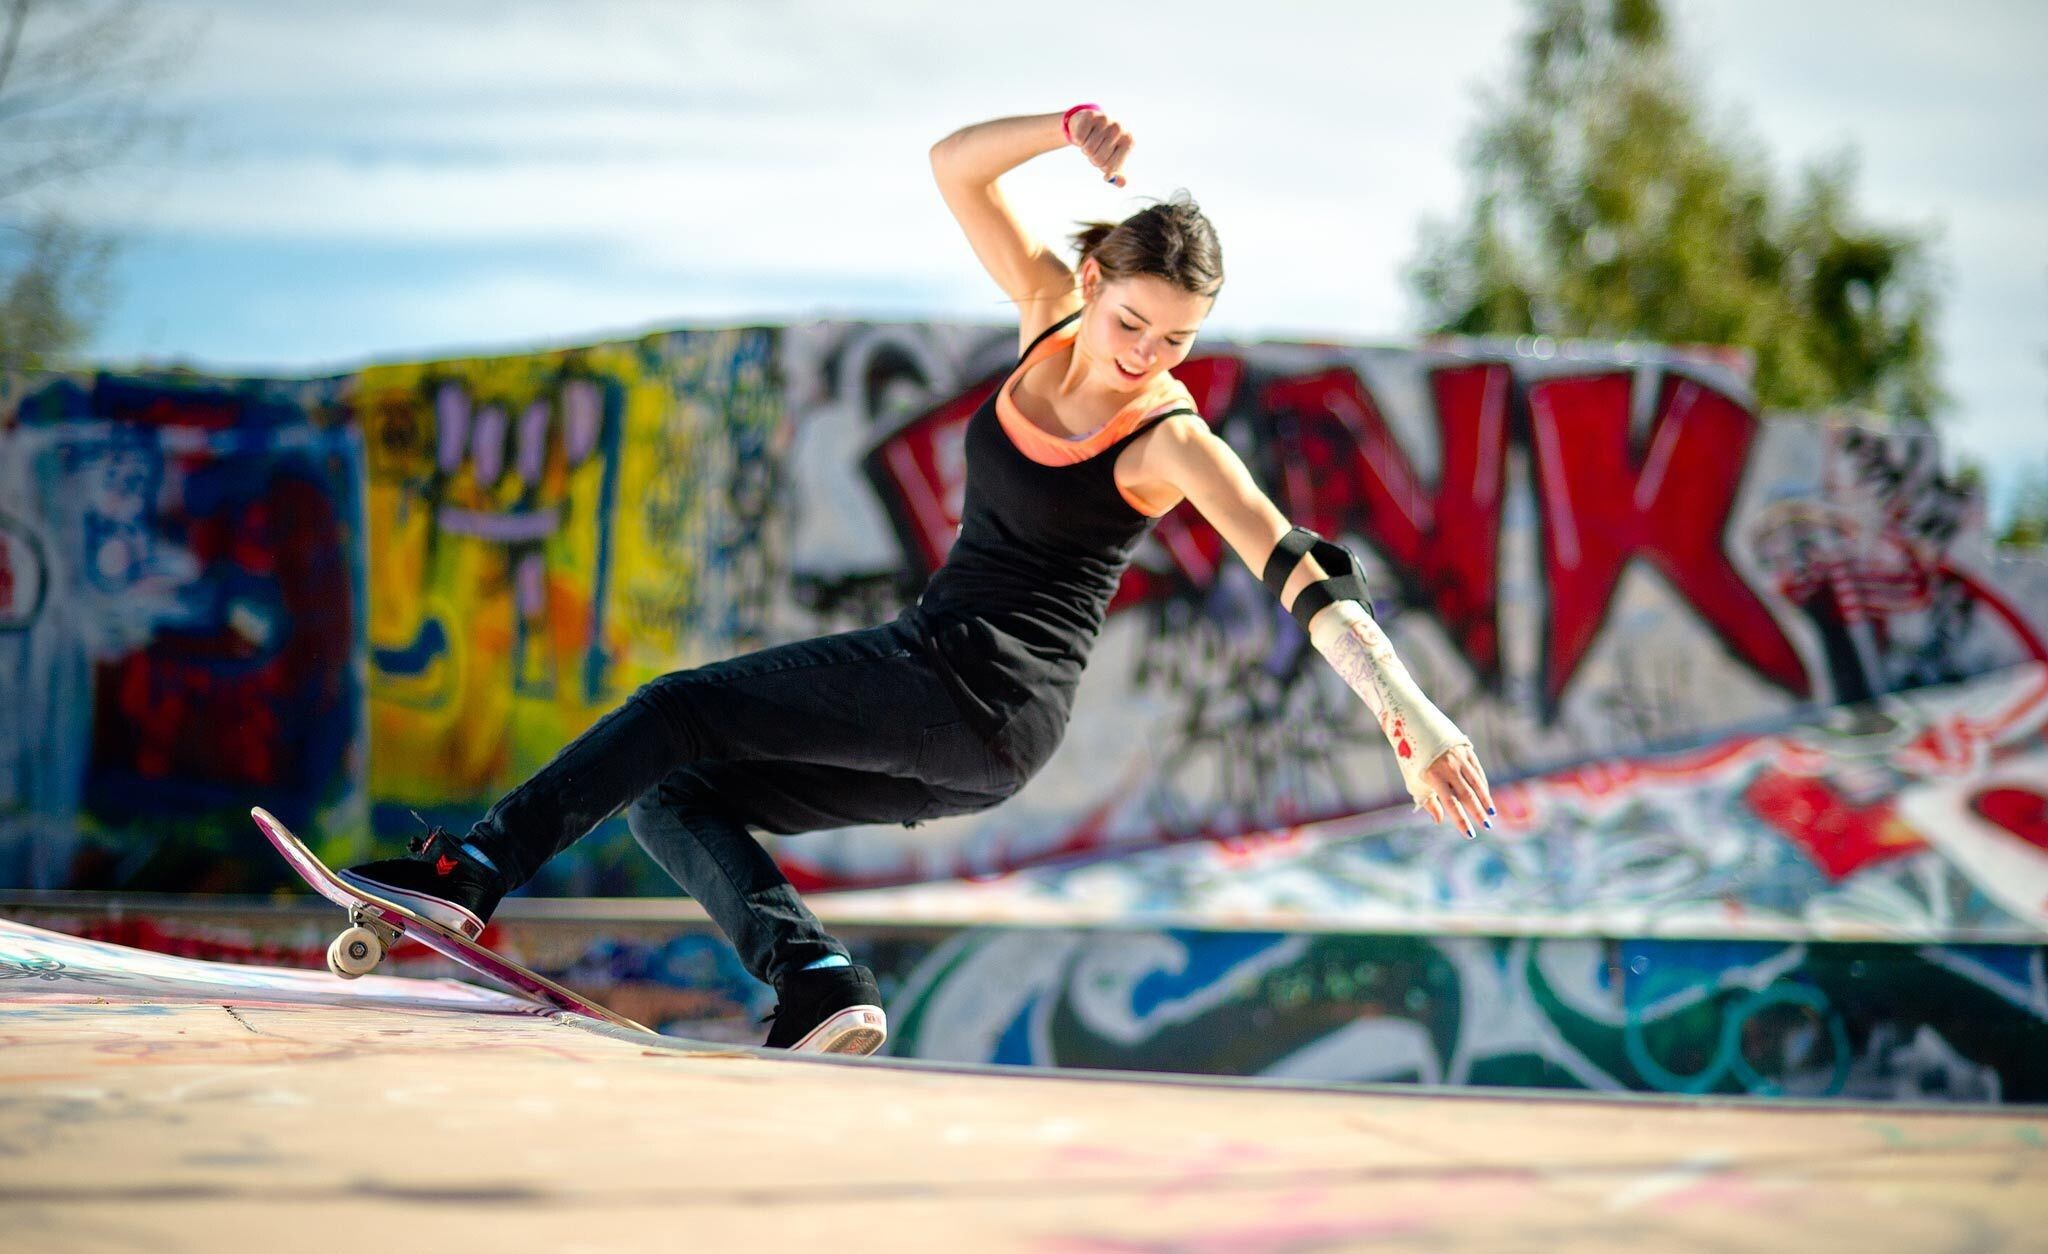 Girl Skateboarding: A skateboarder in mid-flight performing a trick, Freestyle maneuvers, Female skateboard collective. 2050x1260 HD Wallpaper.